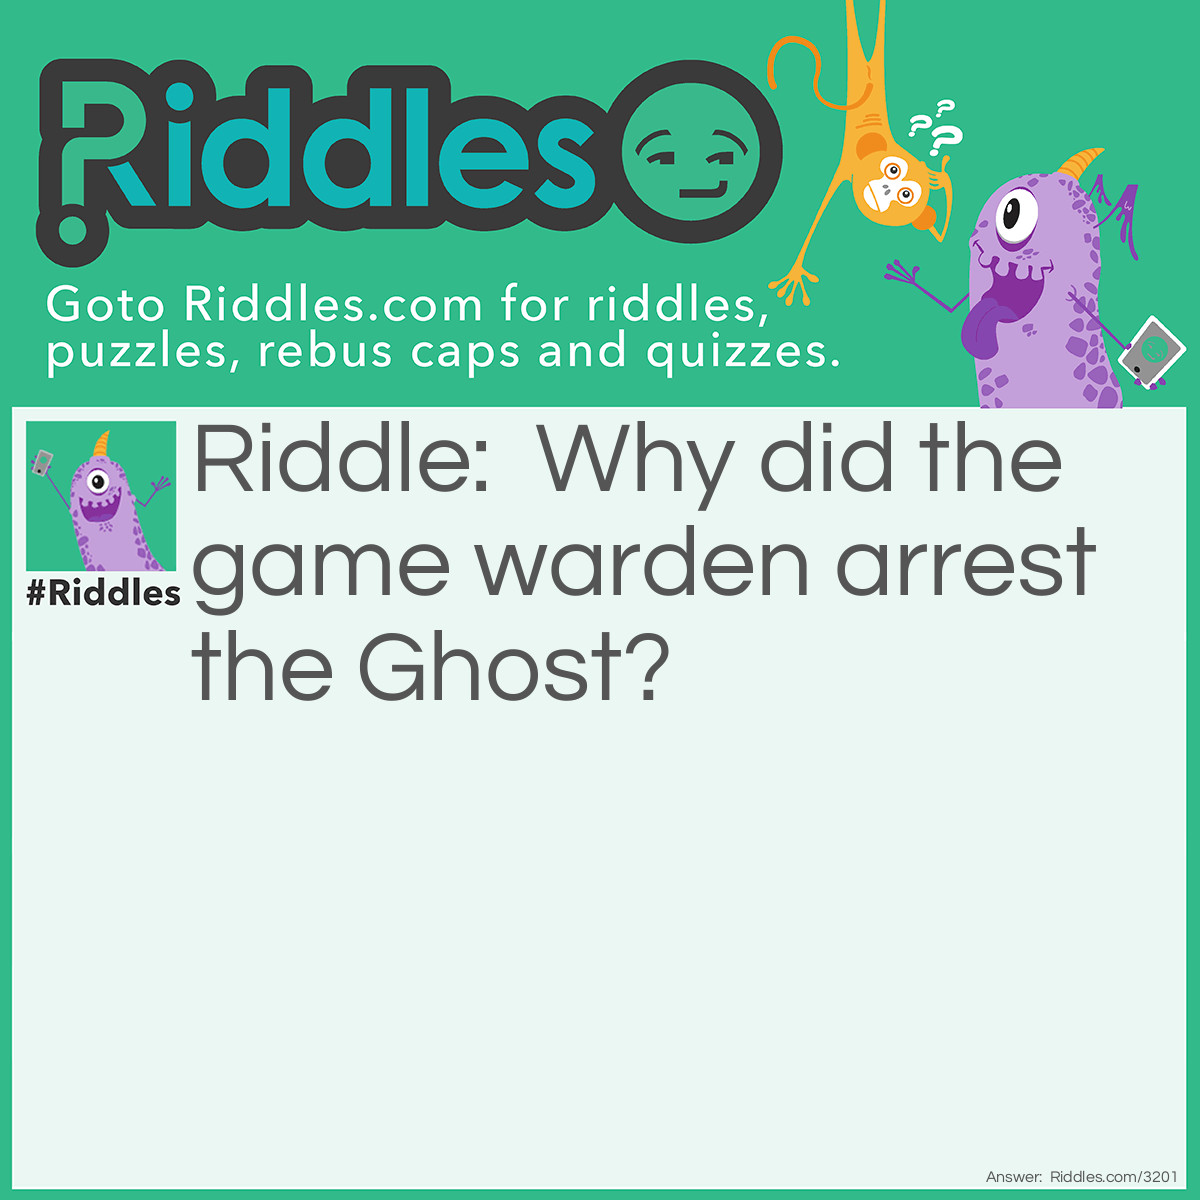 Riddle: Why did the game warden arrest the Ghost? Answer: He did not have a current haunting license.